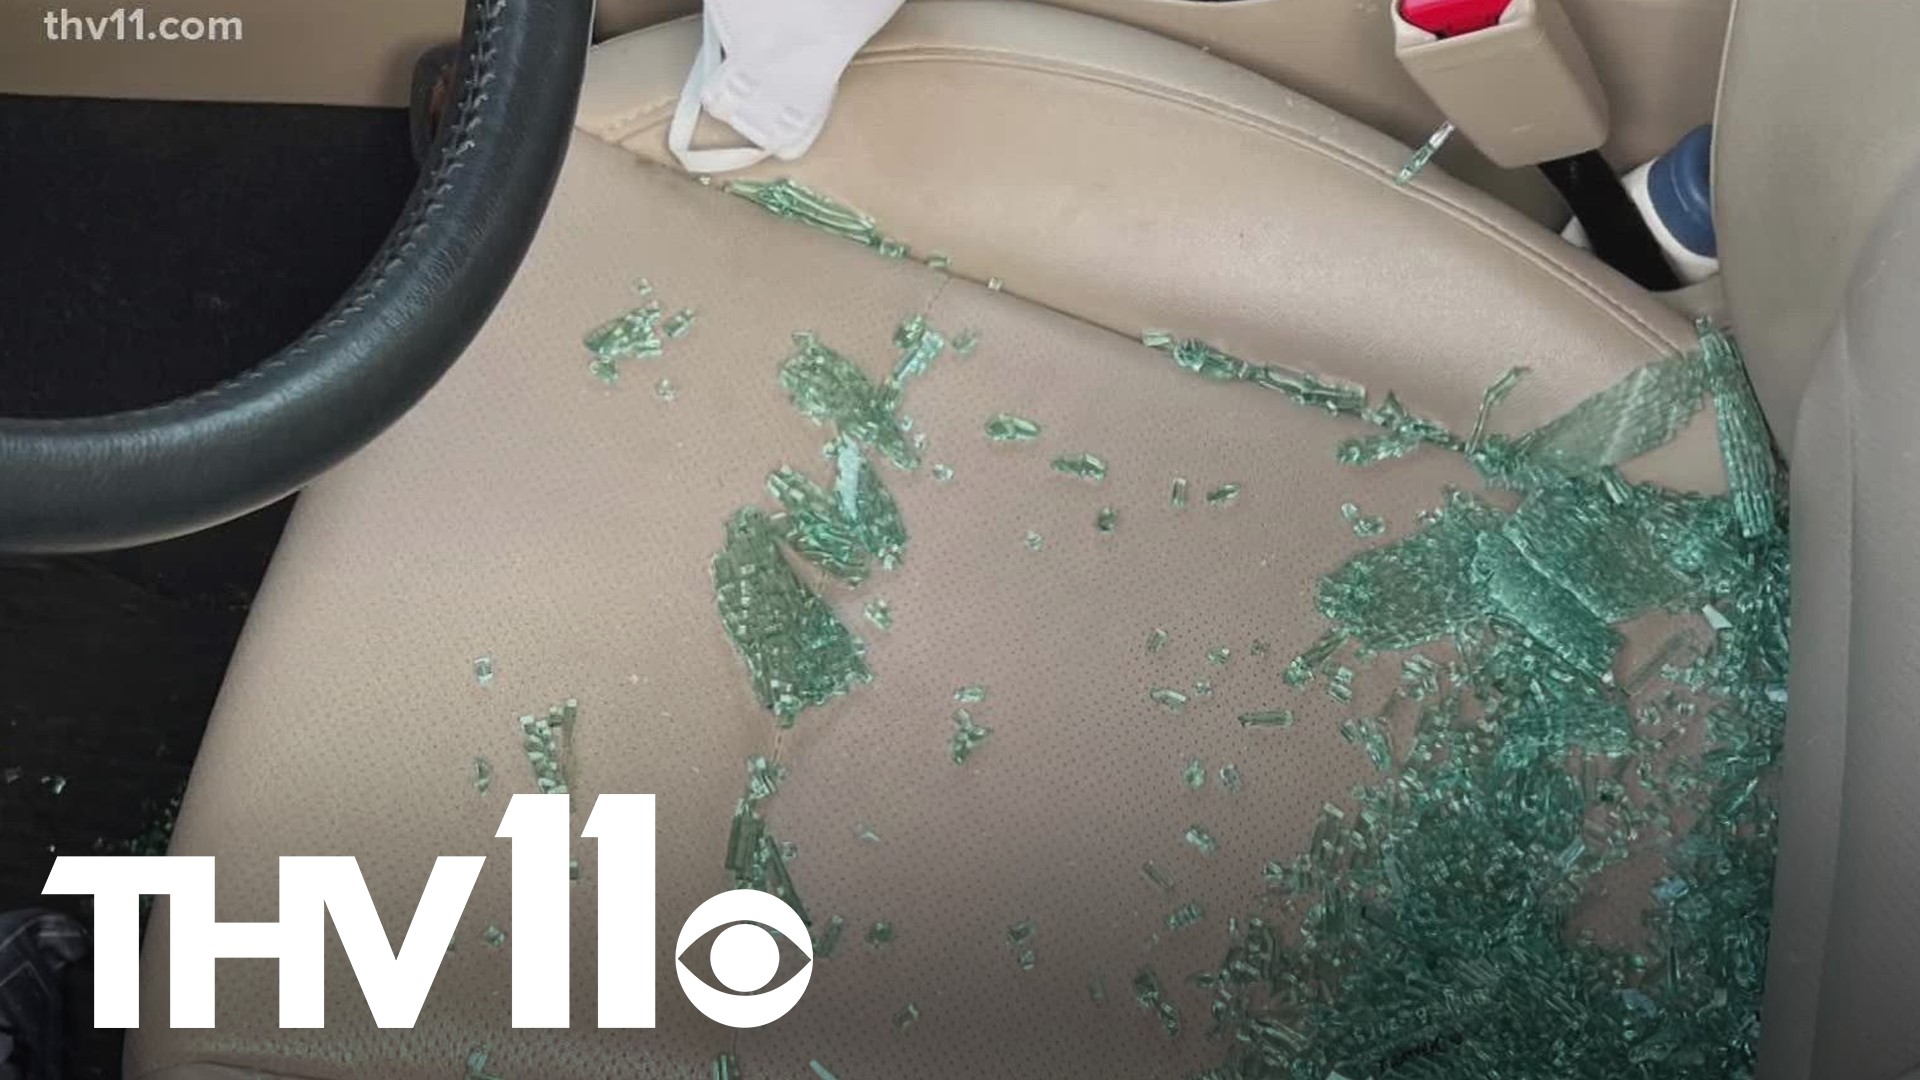 People breaking into vehicles at parks has been an ongoing issue in Central Arkansas— and now police are showing how you can avoid becoming a victim.